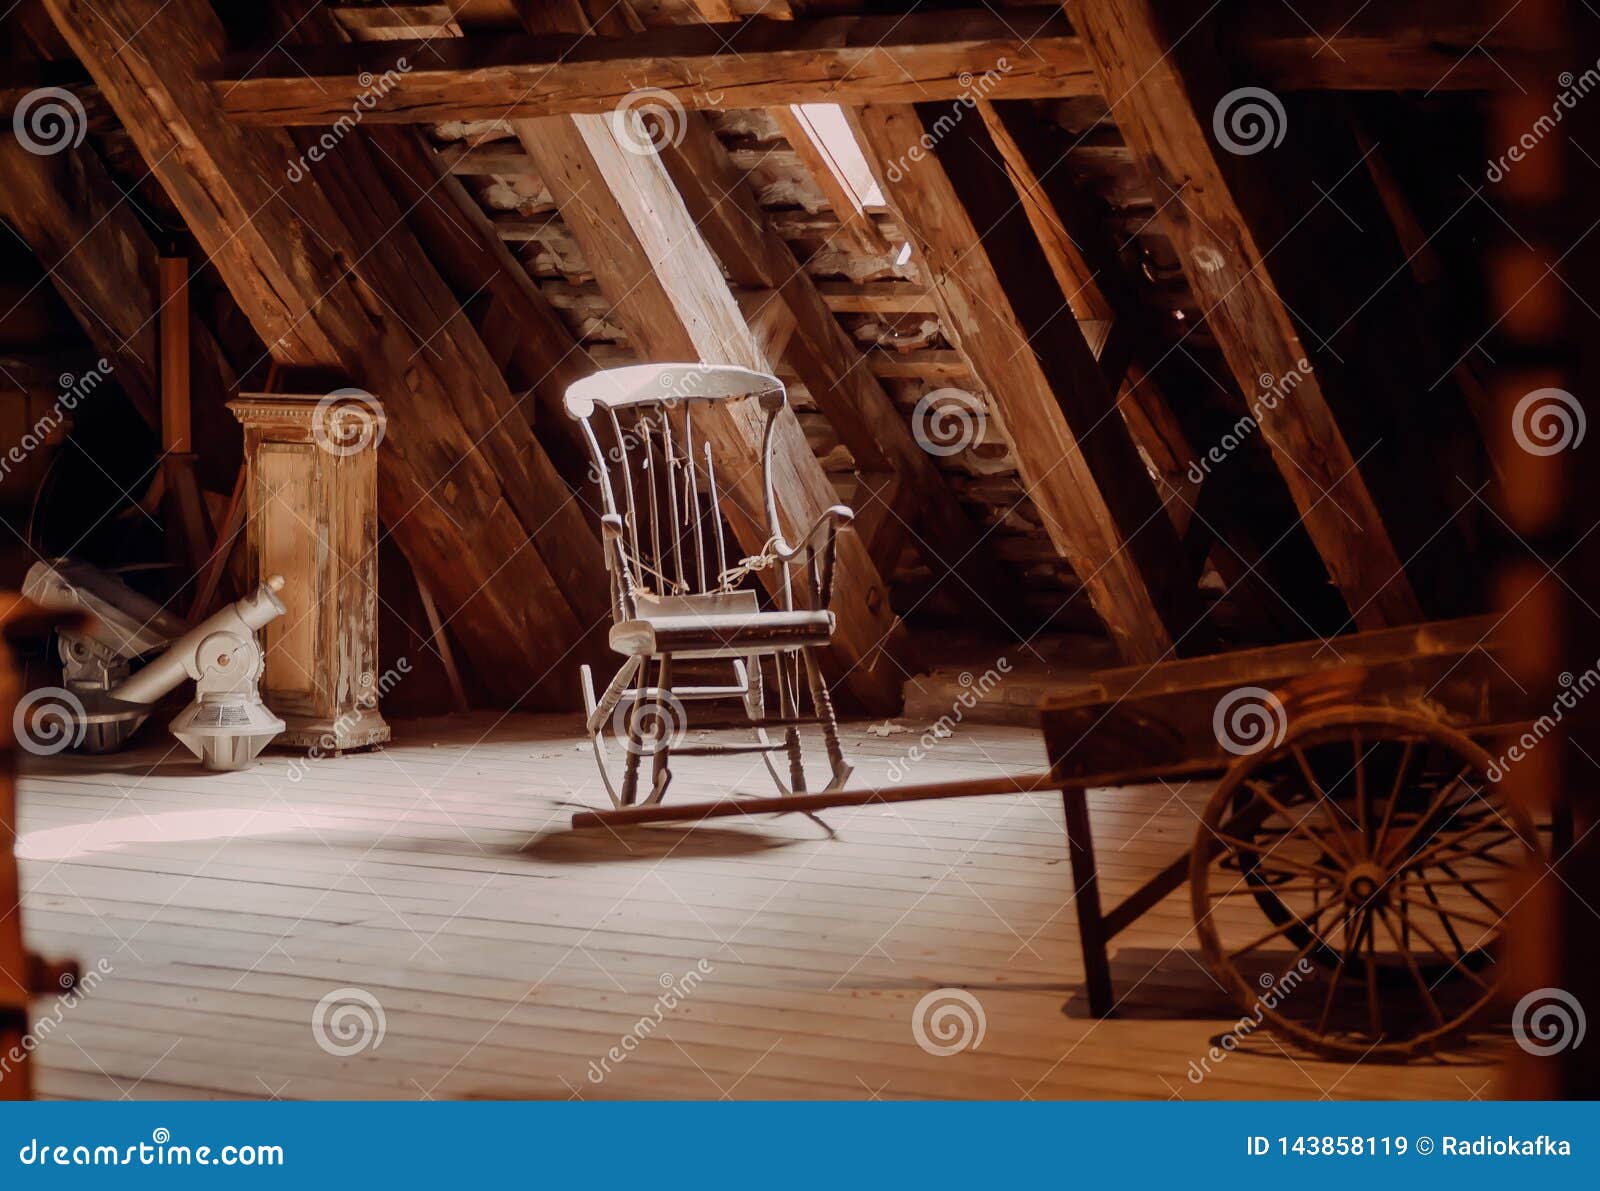 Vintage Furniture In Abandoned House Old Rocking Chair In Rustic